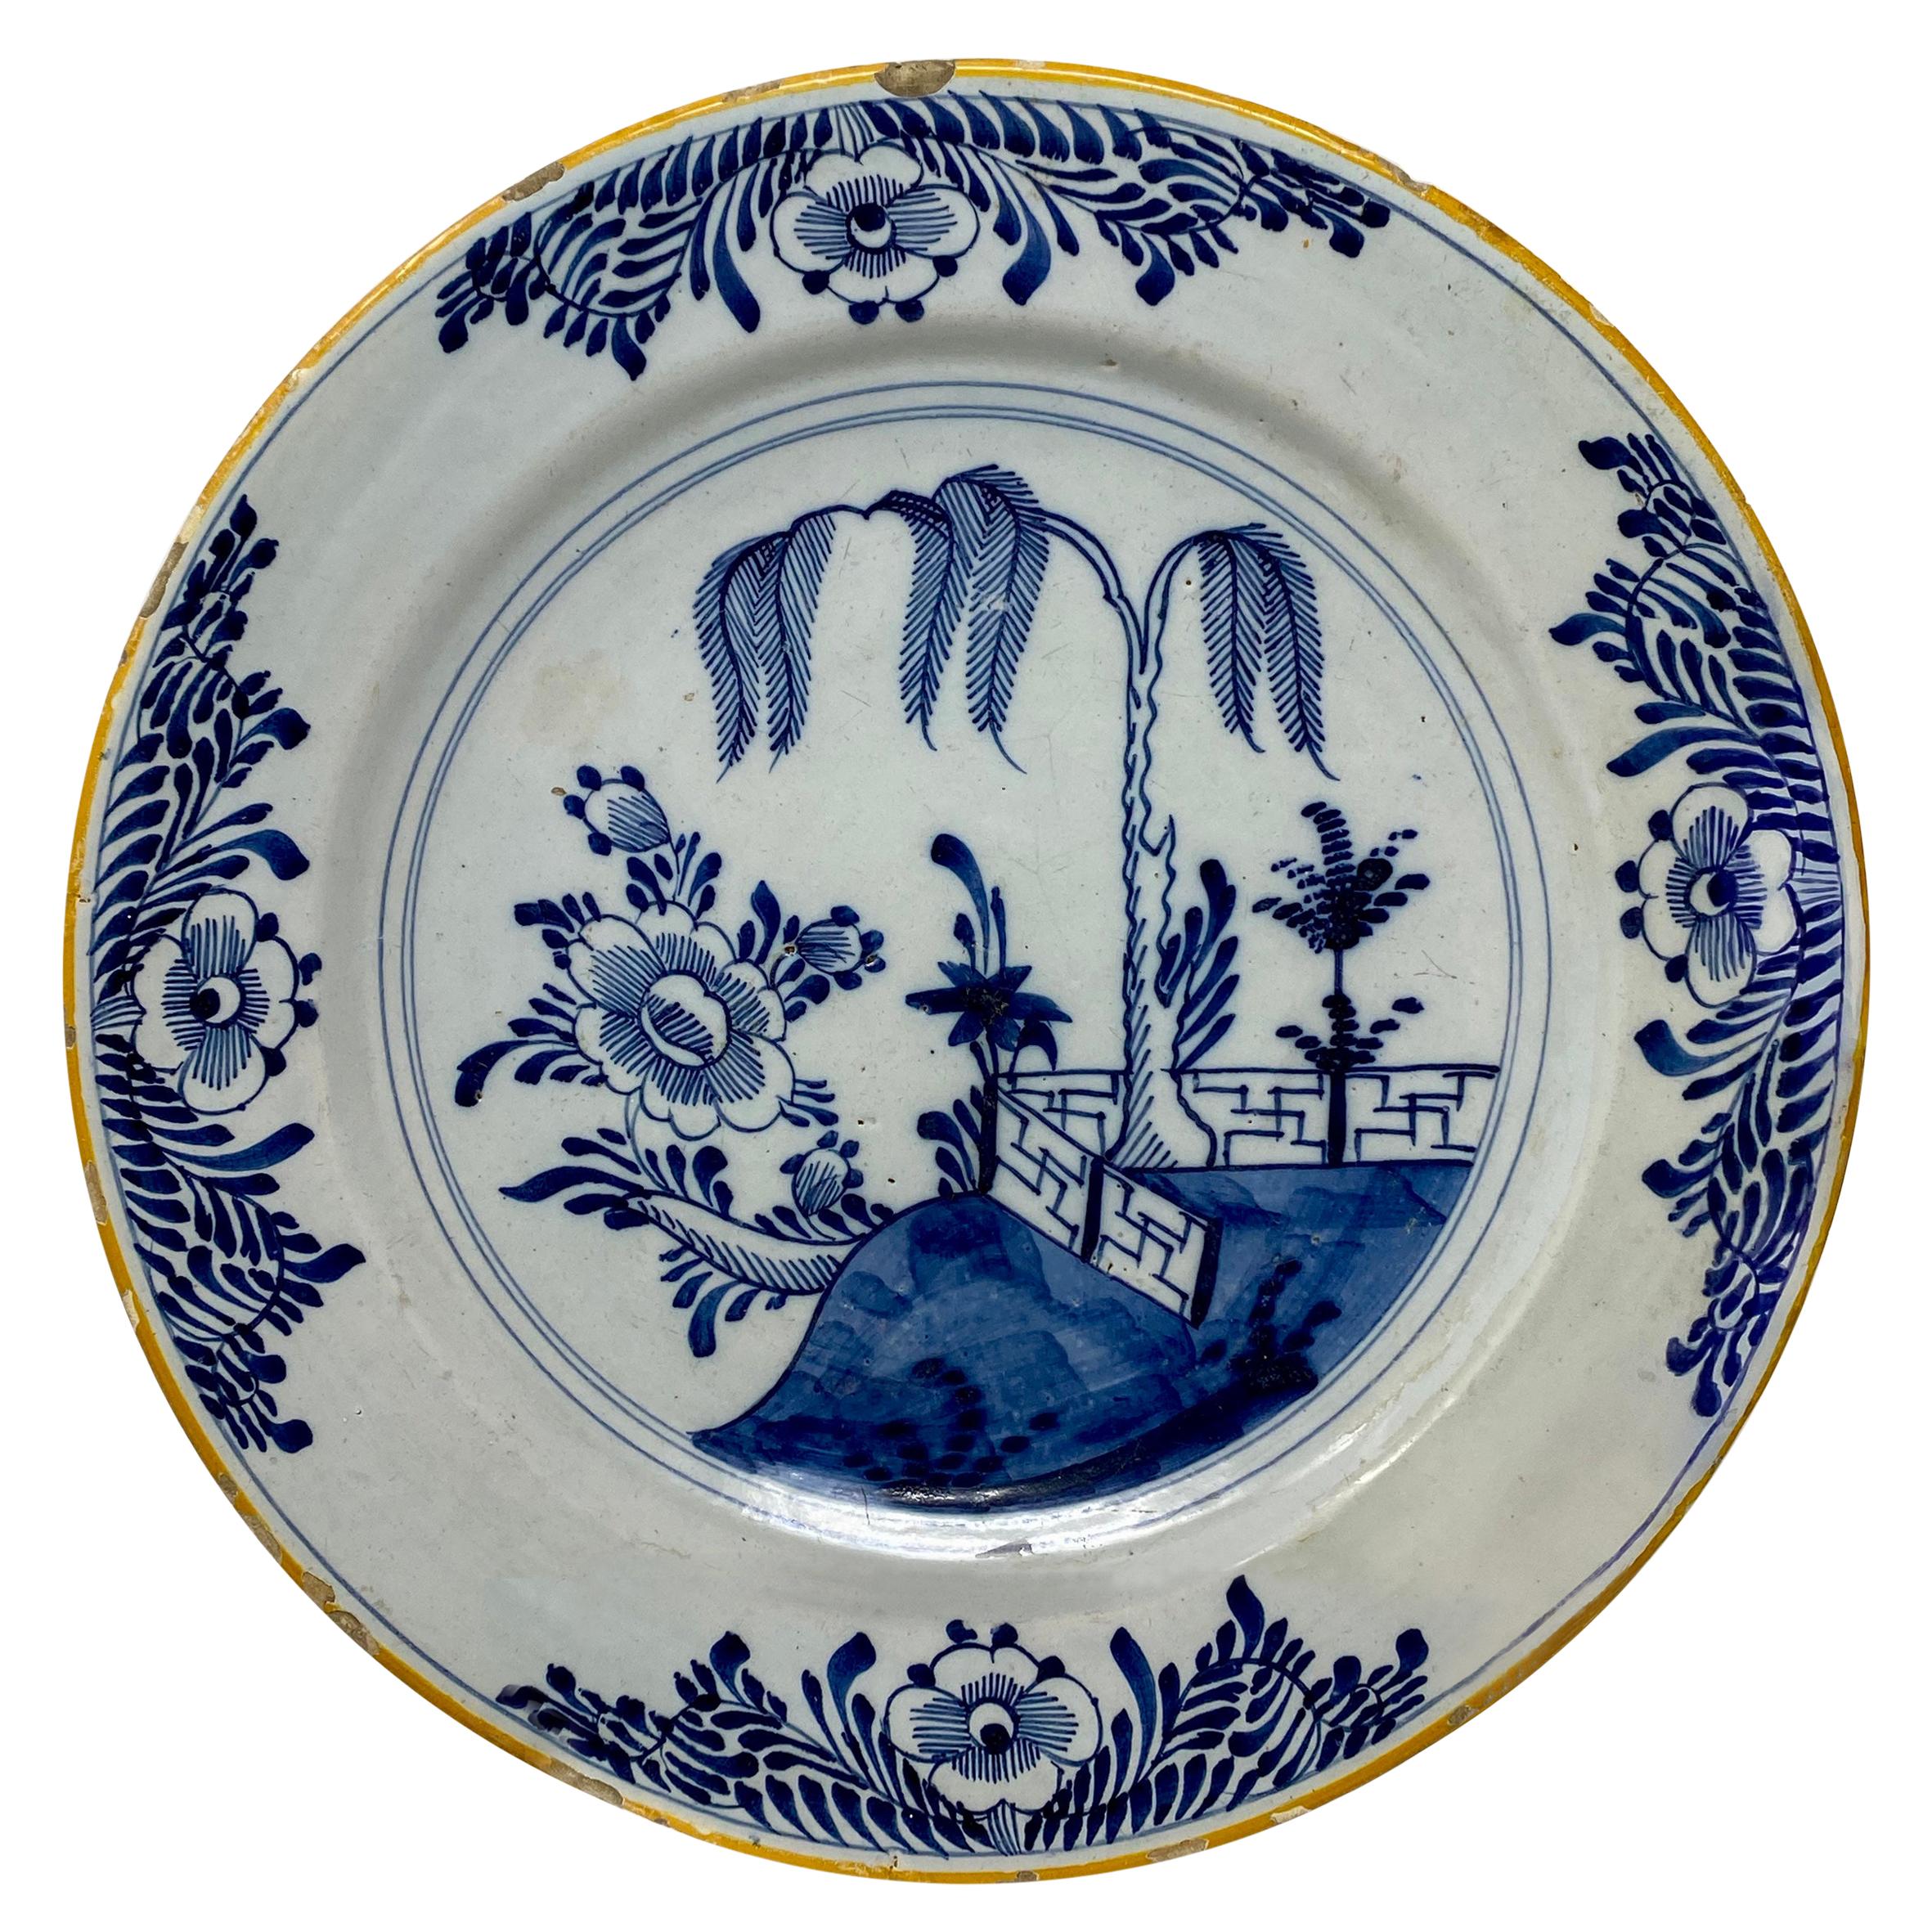 Antique Dutch Porcelain Charger in the Chinese Manner, circa 1750-1780